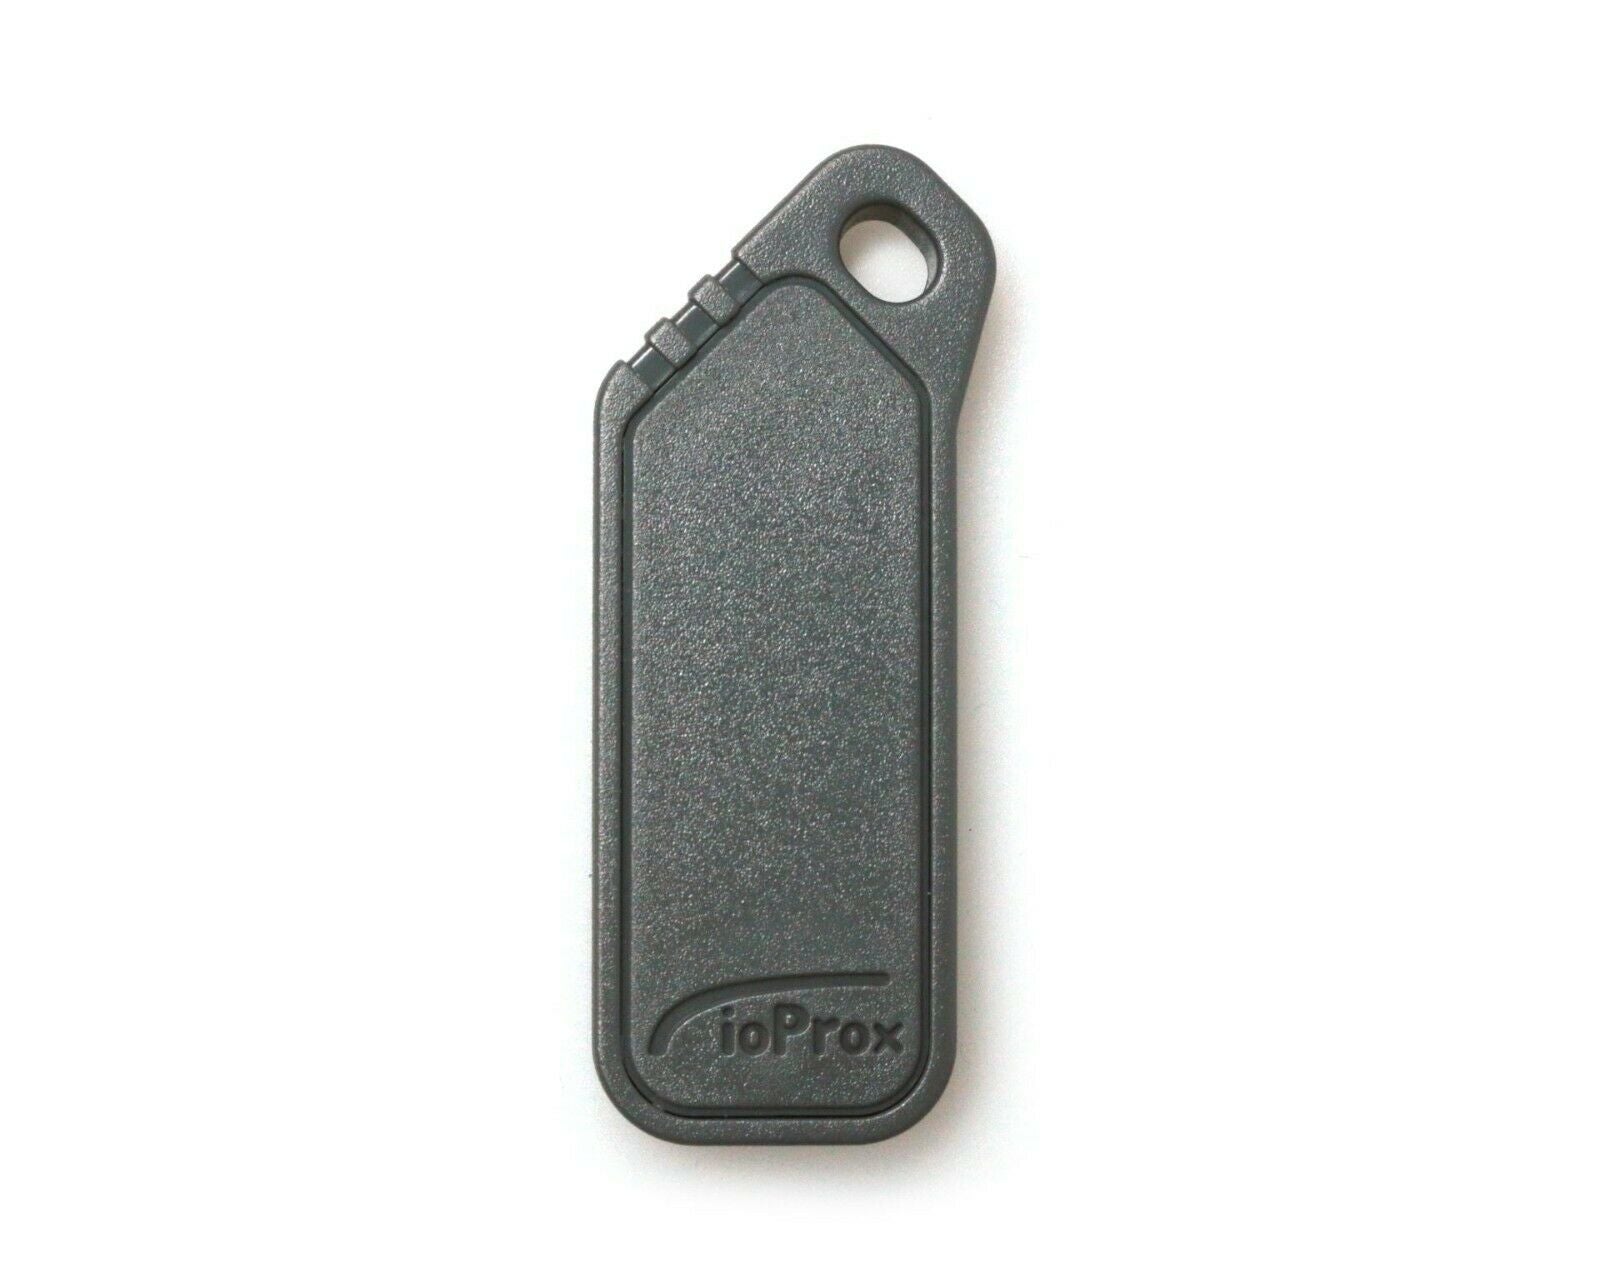 Kantech ioProx 26bit Wiegand Key Tags, P40KEY - Pack of 25